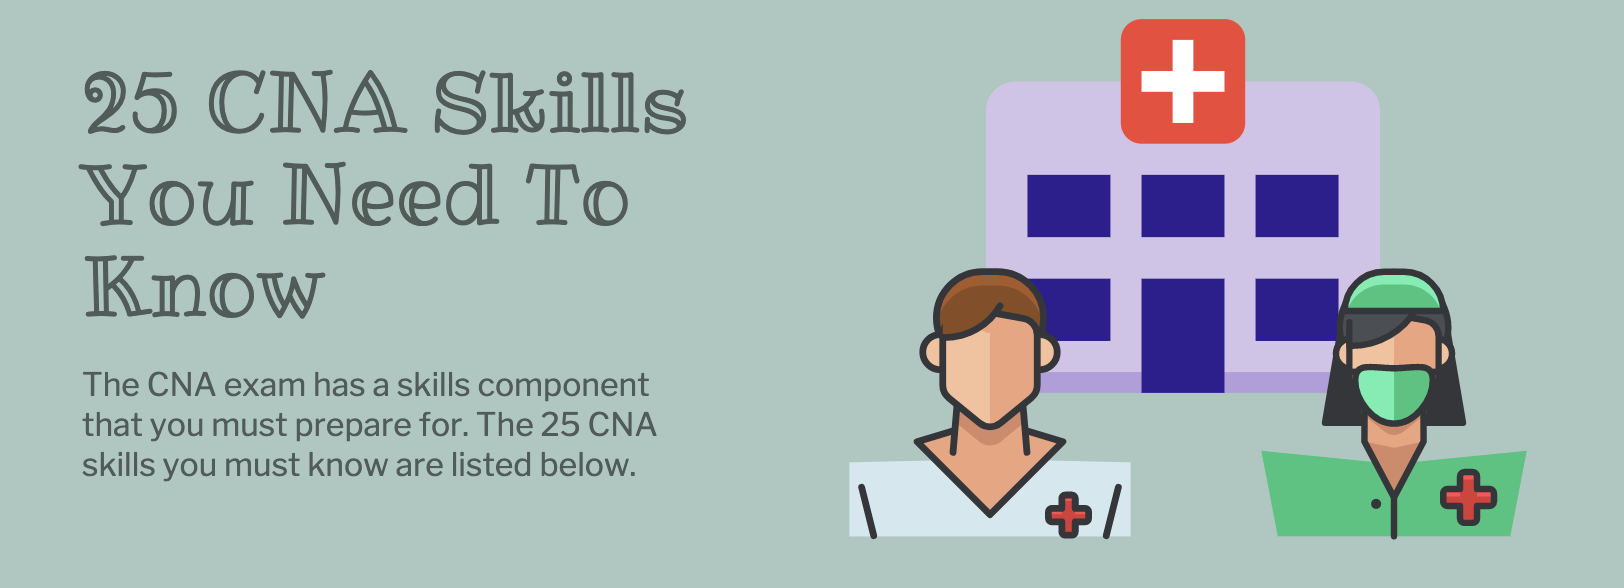 25 CNA Skills You Need To Know